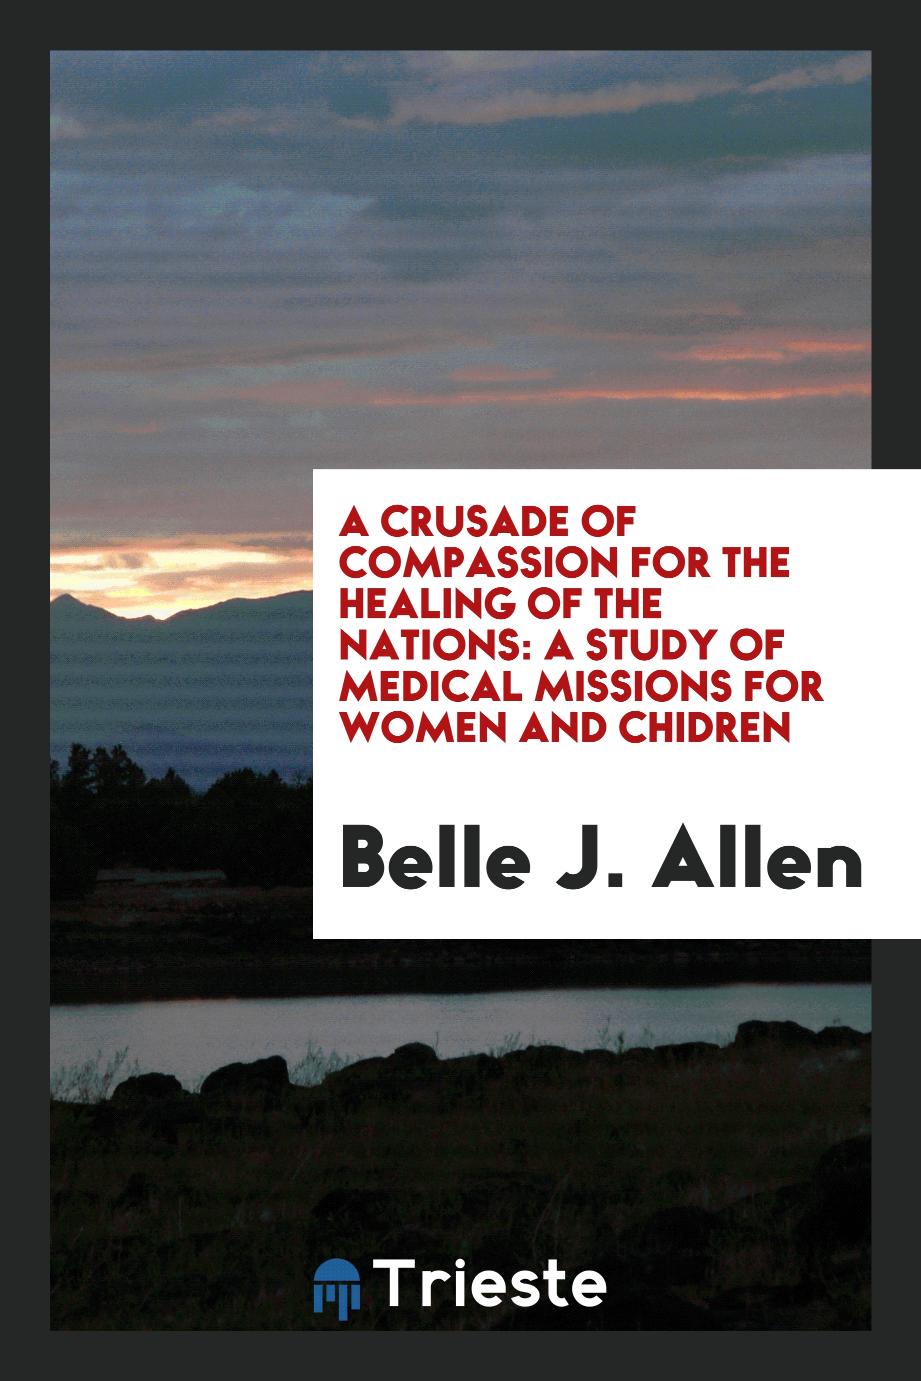 A crusade of compassion for the healing of the nations: a study of medical missions for women and chidren